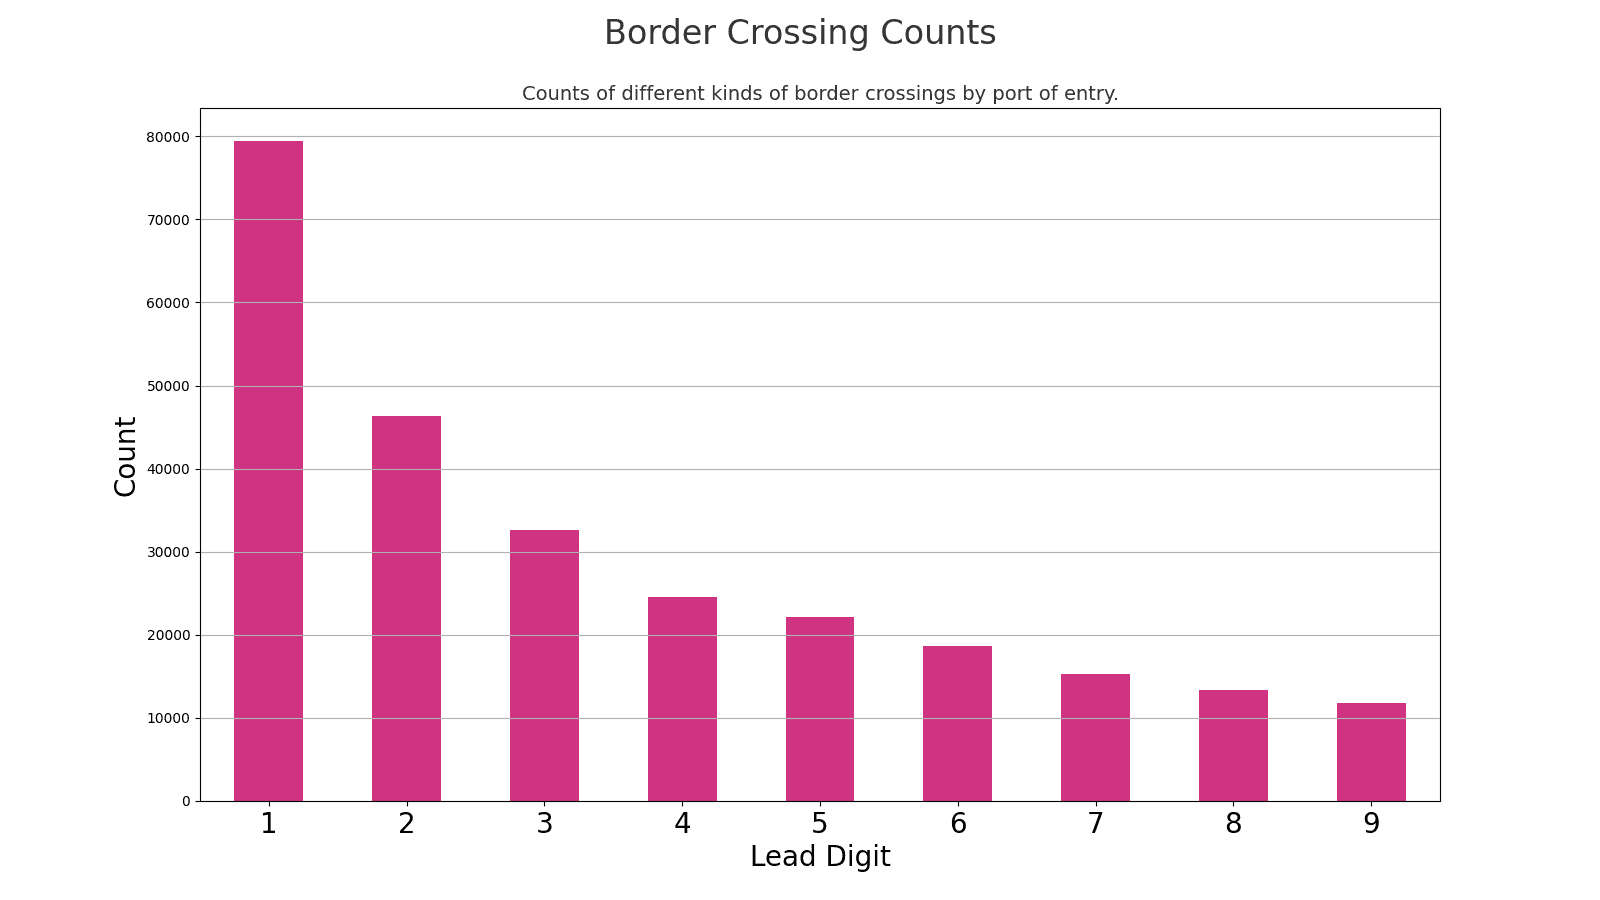 The distribution of lead digits from federal border crossing counts.